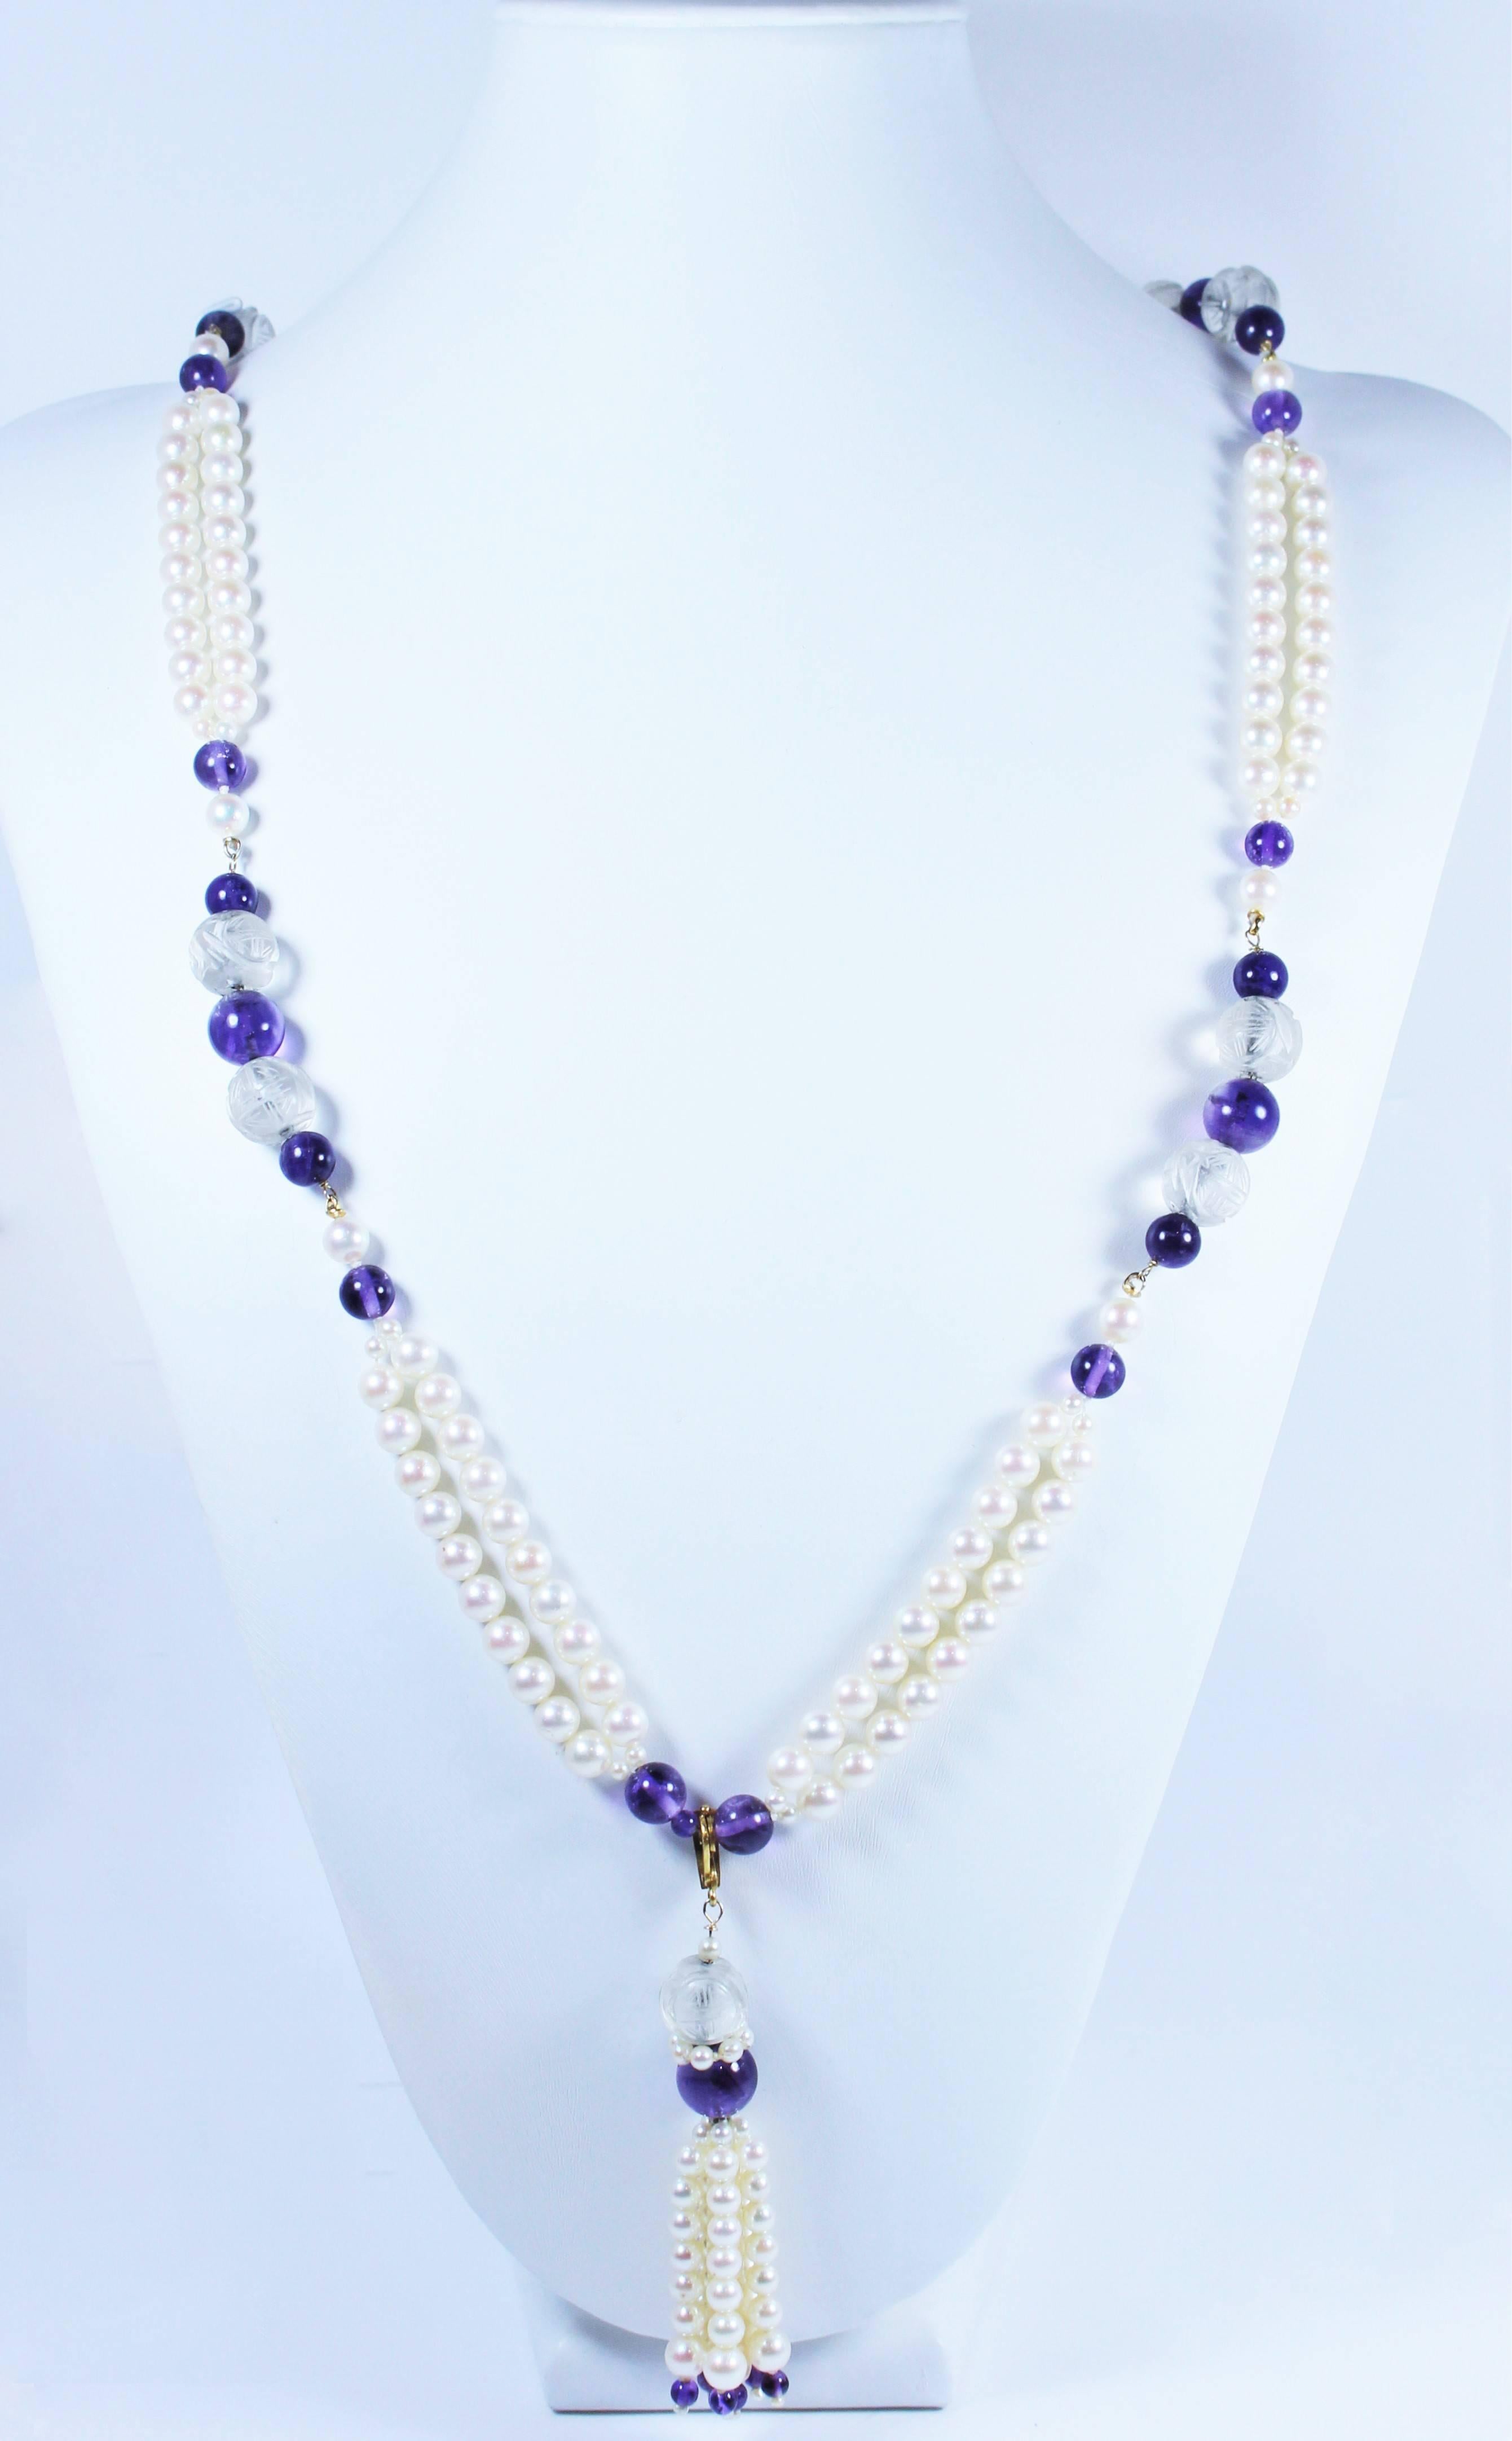 This necklace is composed of pearls with cut crystal, Amethyst, and 18KT gold. Features a removable tassel. In excellent vintage condition.

Specs: 
18KT Yellow Gold
Length: 38